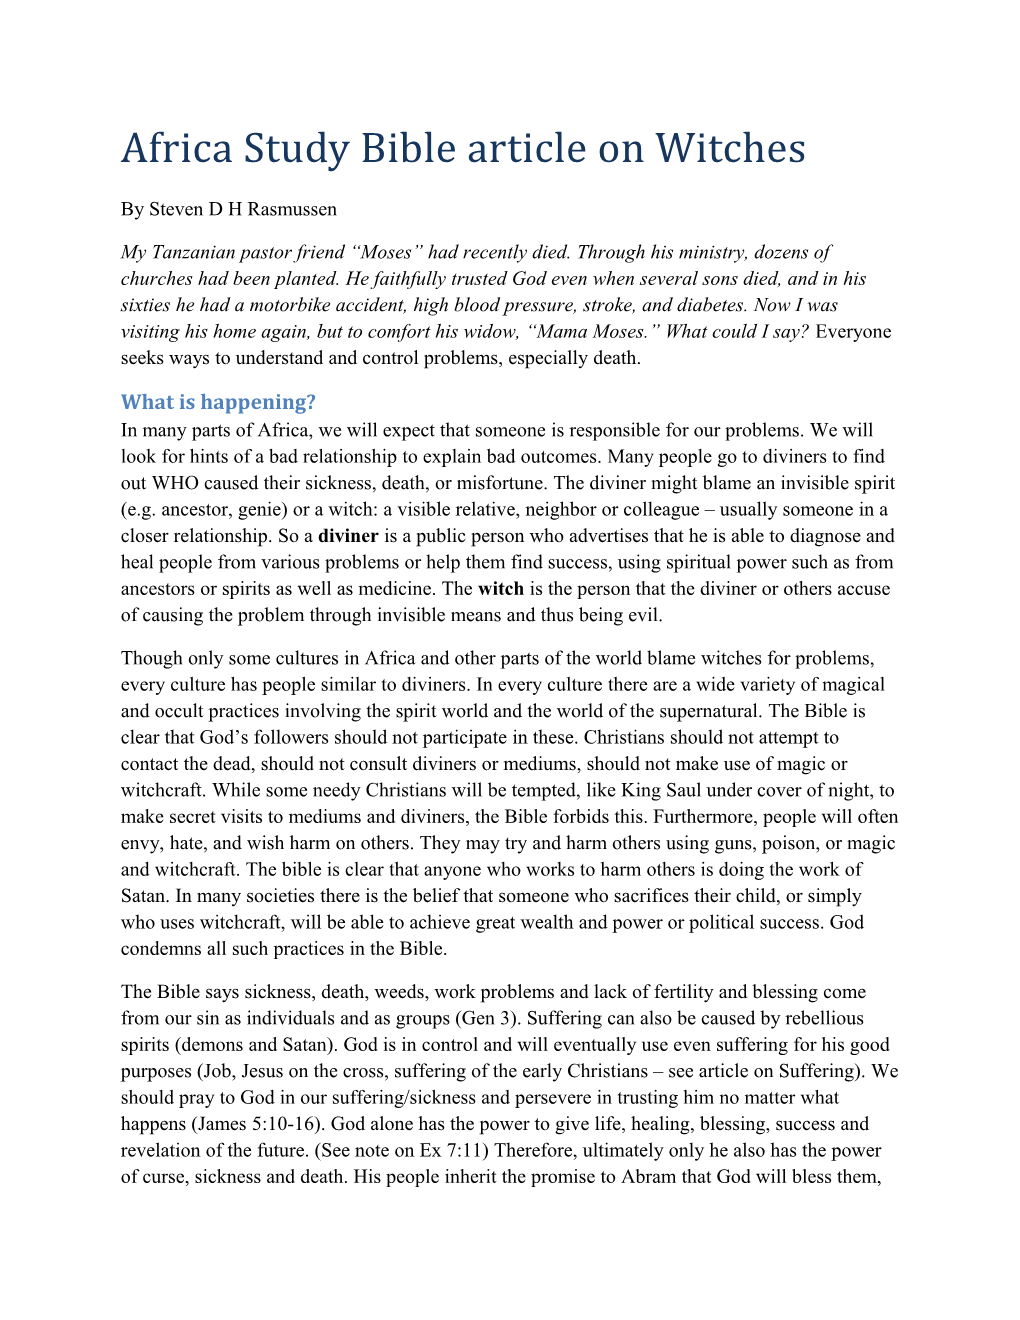 Africa Study Bible Article on Witches